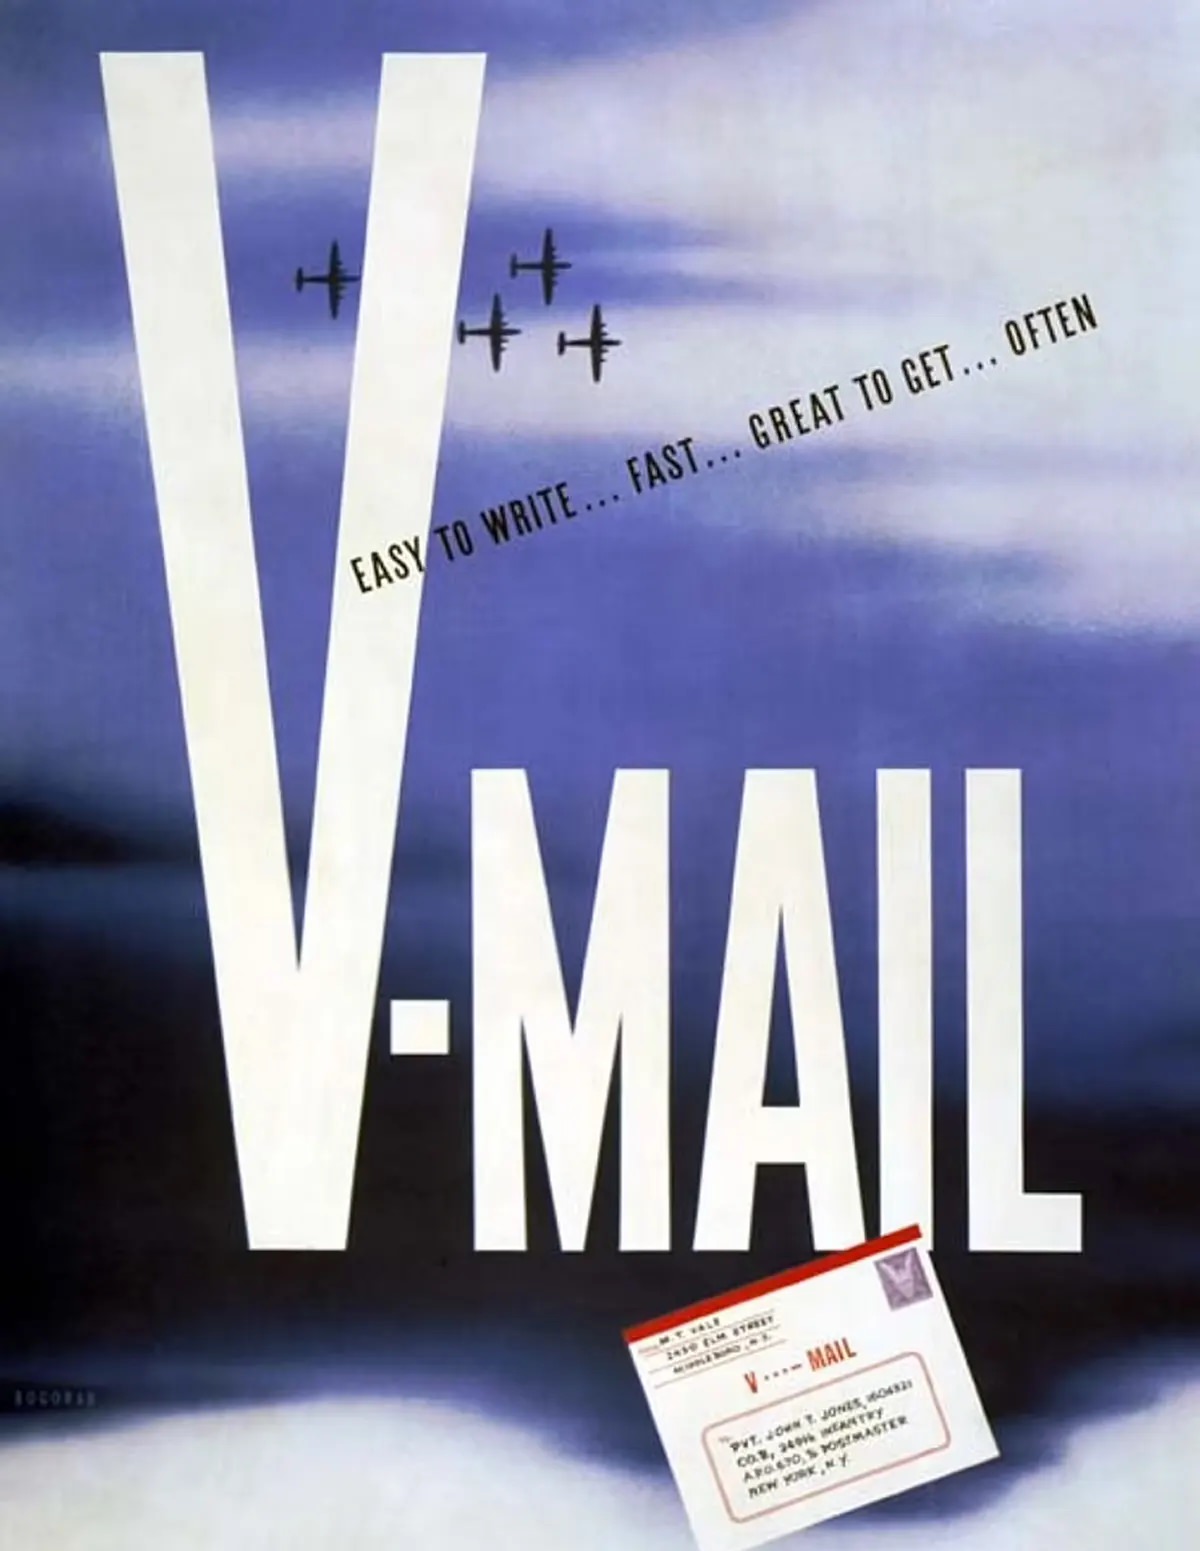 Victory Mail: The WWII Program that Significantly Reduced the Cost and Time of U.S. Military Postal Service